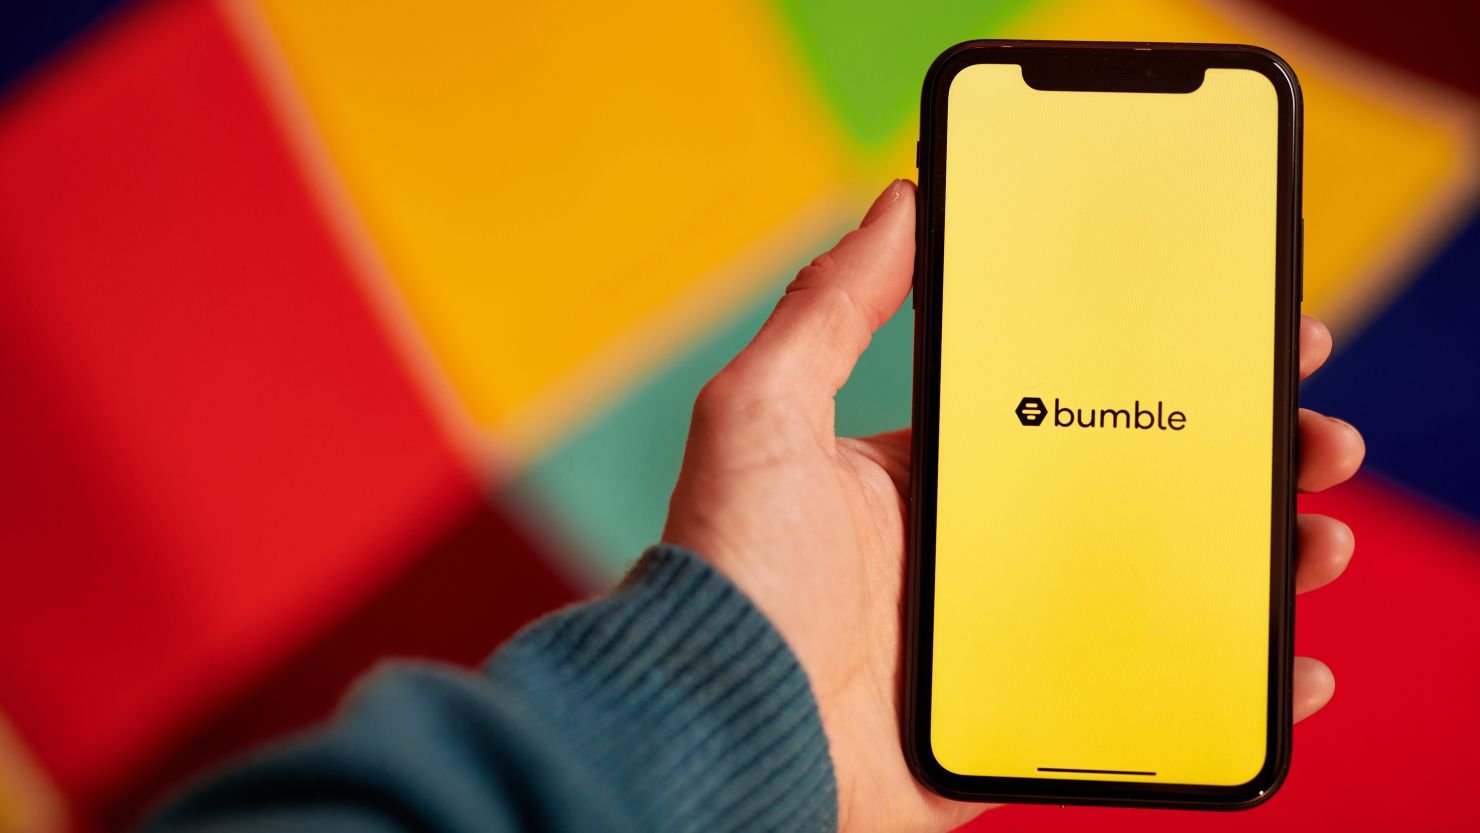 The Bumble logo shown on a smartphone. Bumble is doing away with the requirement that women message potential matches first.